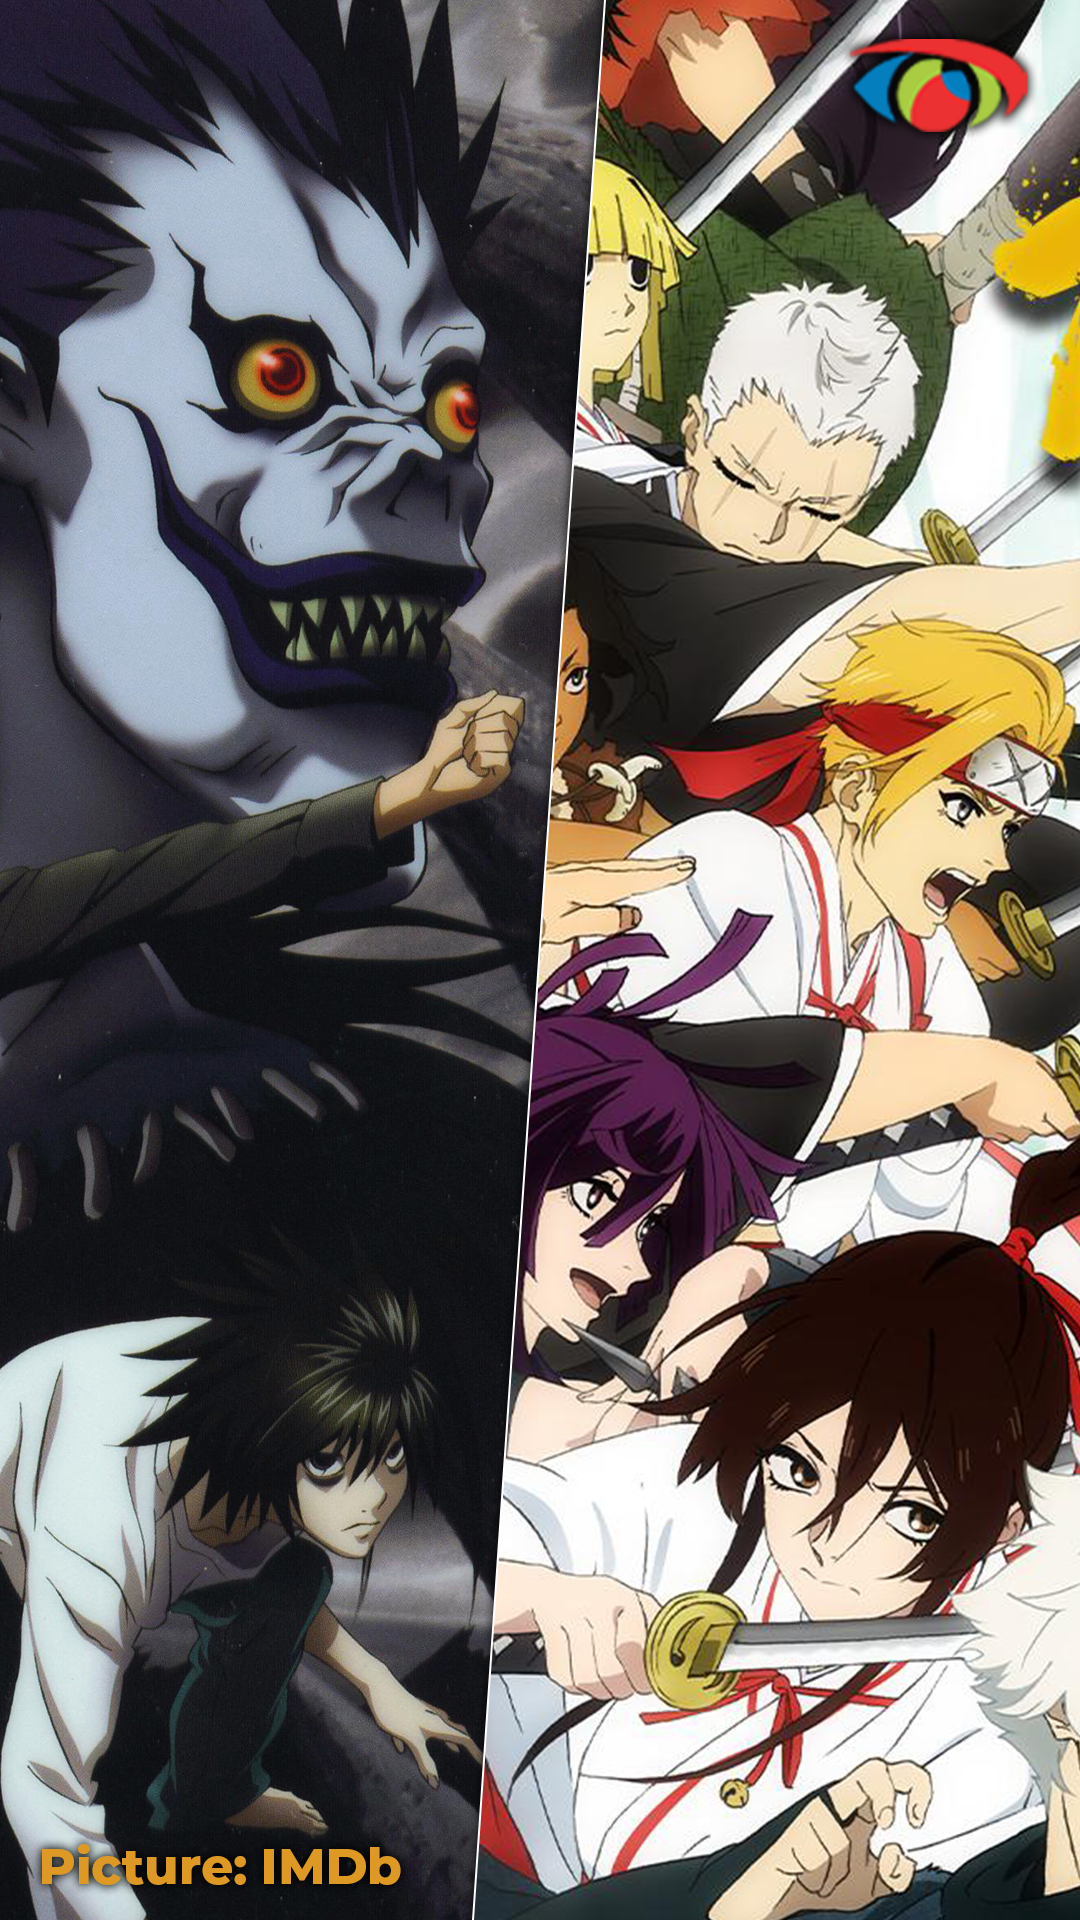 The 20 Strongest Monsters In Anime, Ranked